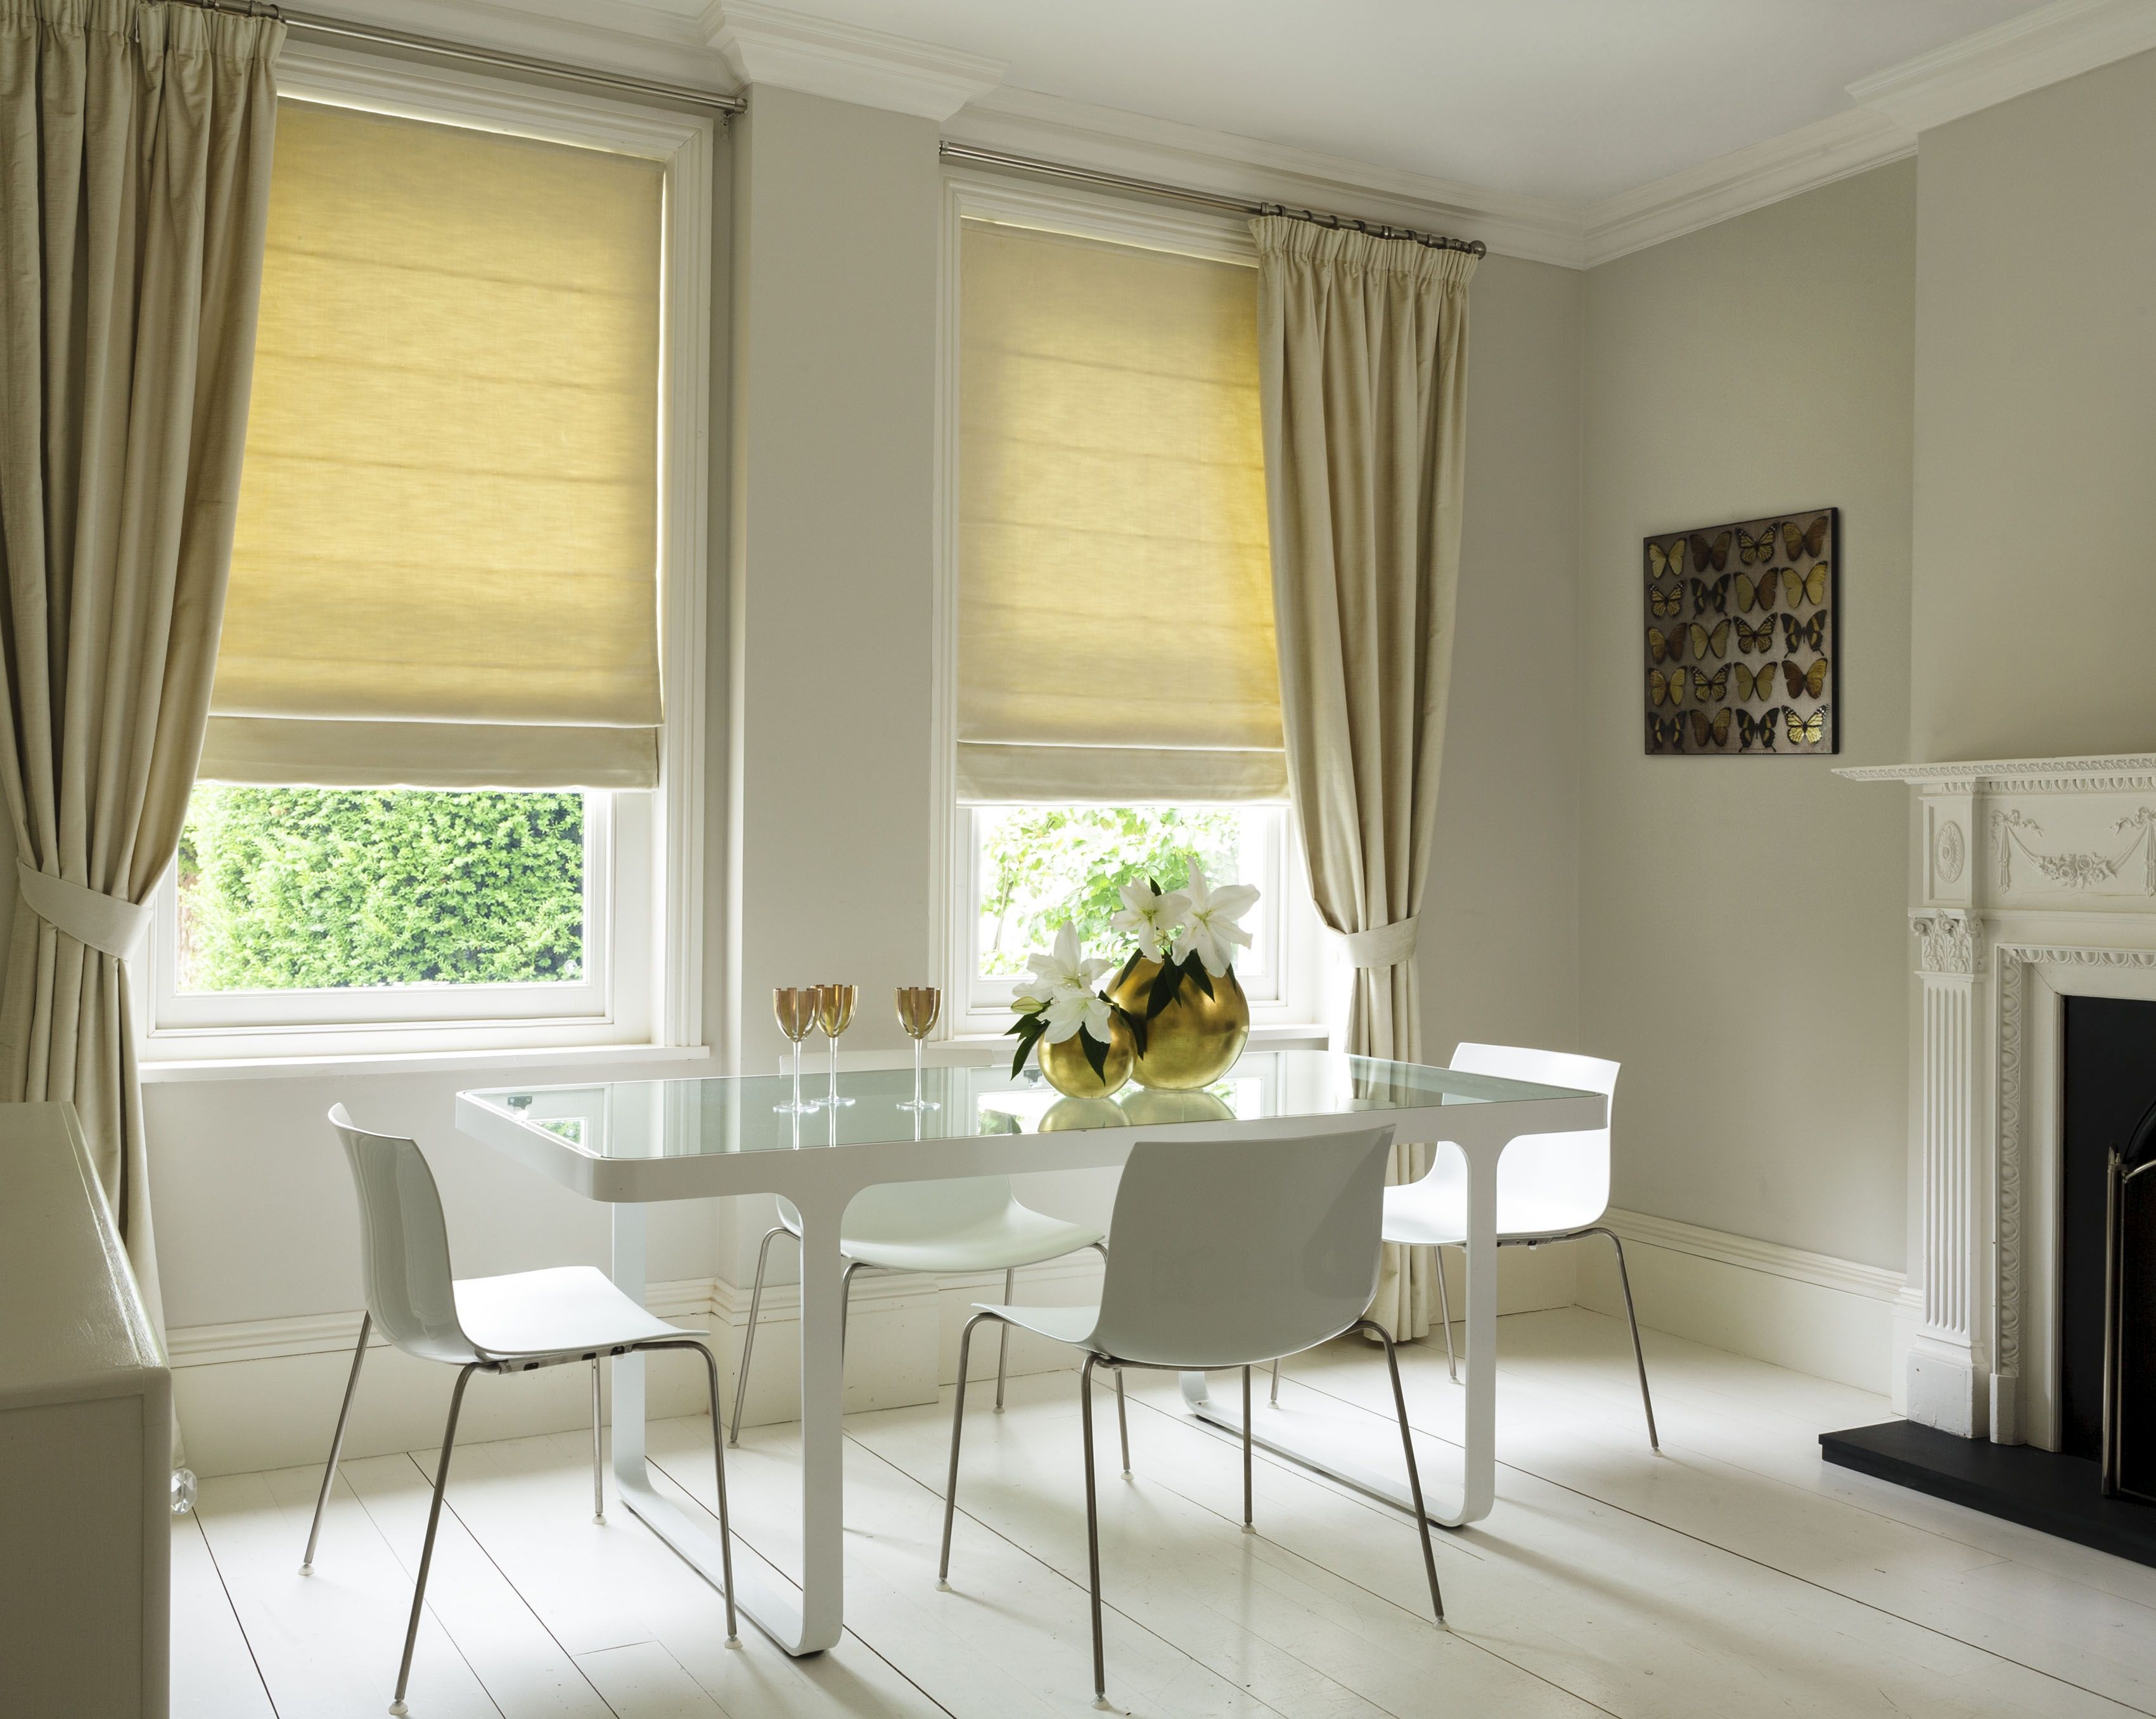 Cheapest Blinds Uk Ltd Black Roman Blinds With Regard To Black And White Roman Blinds (View 13 of 15)